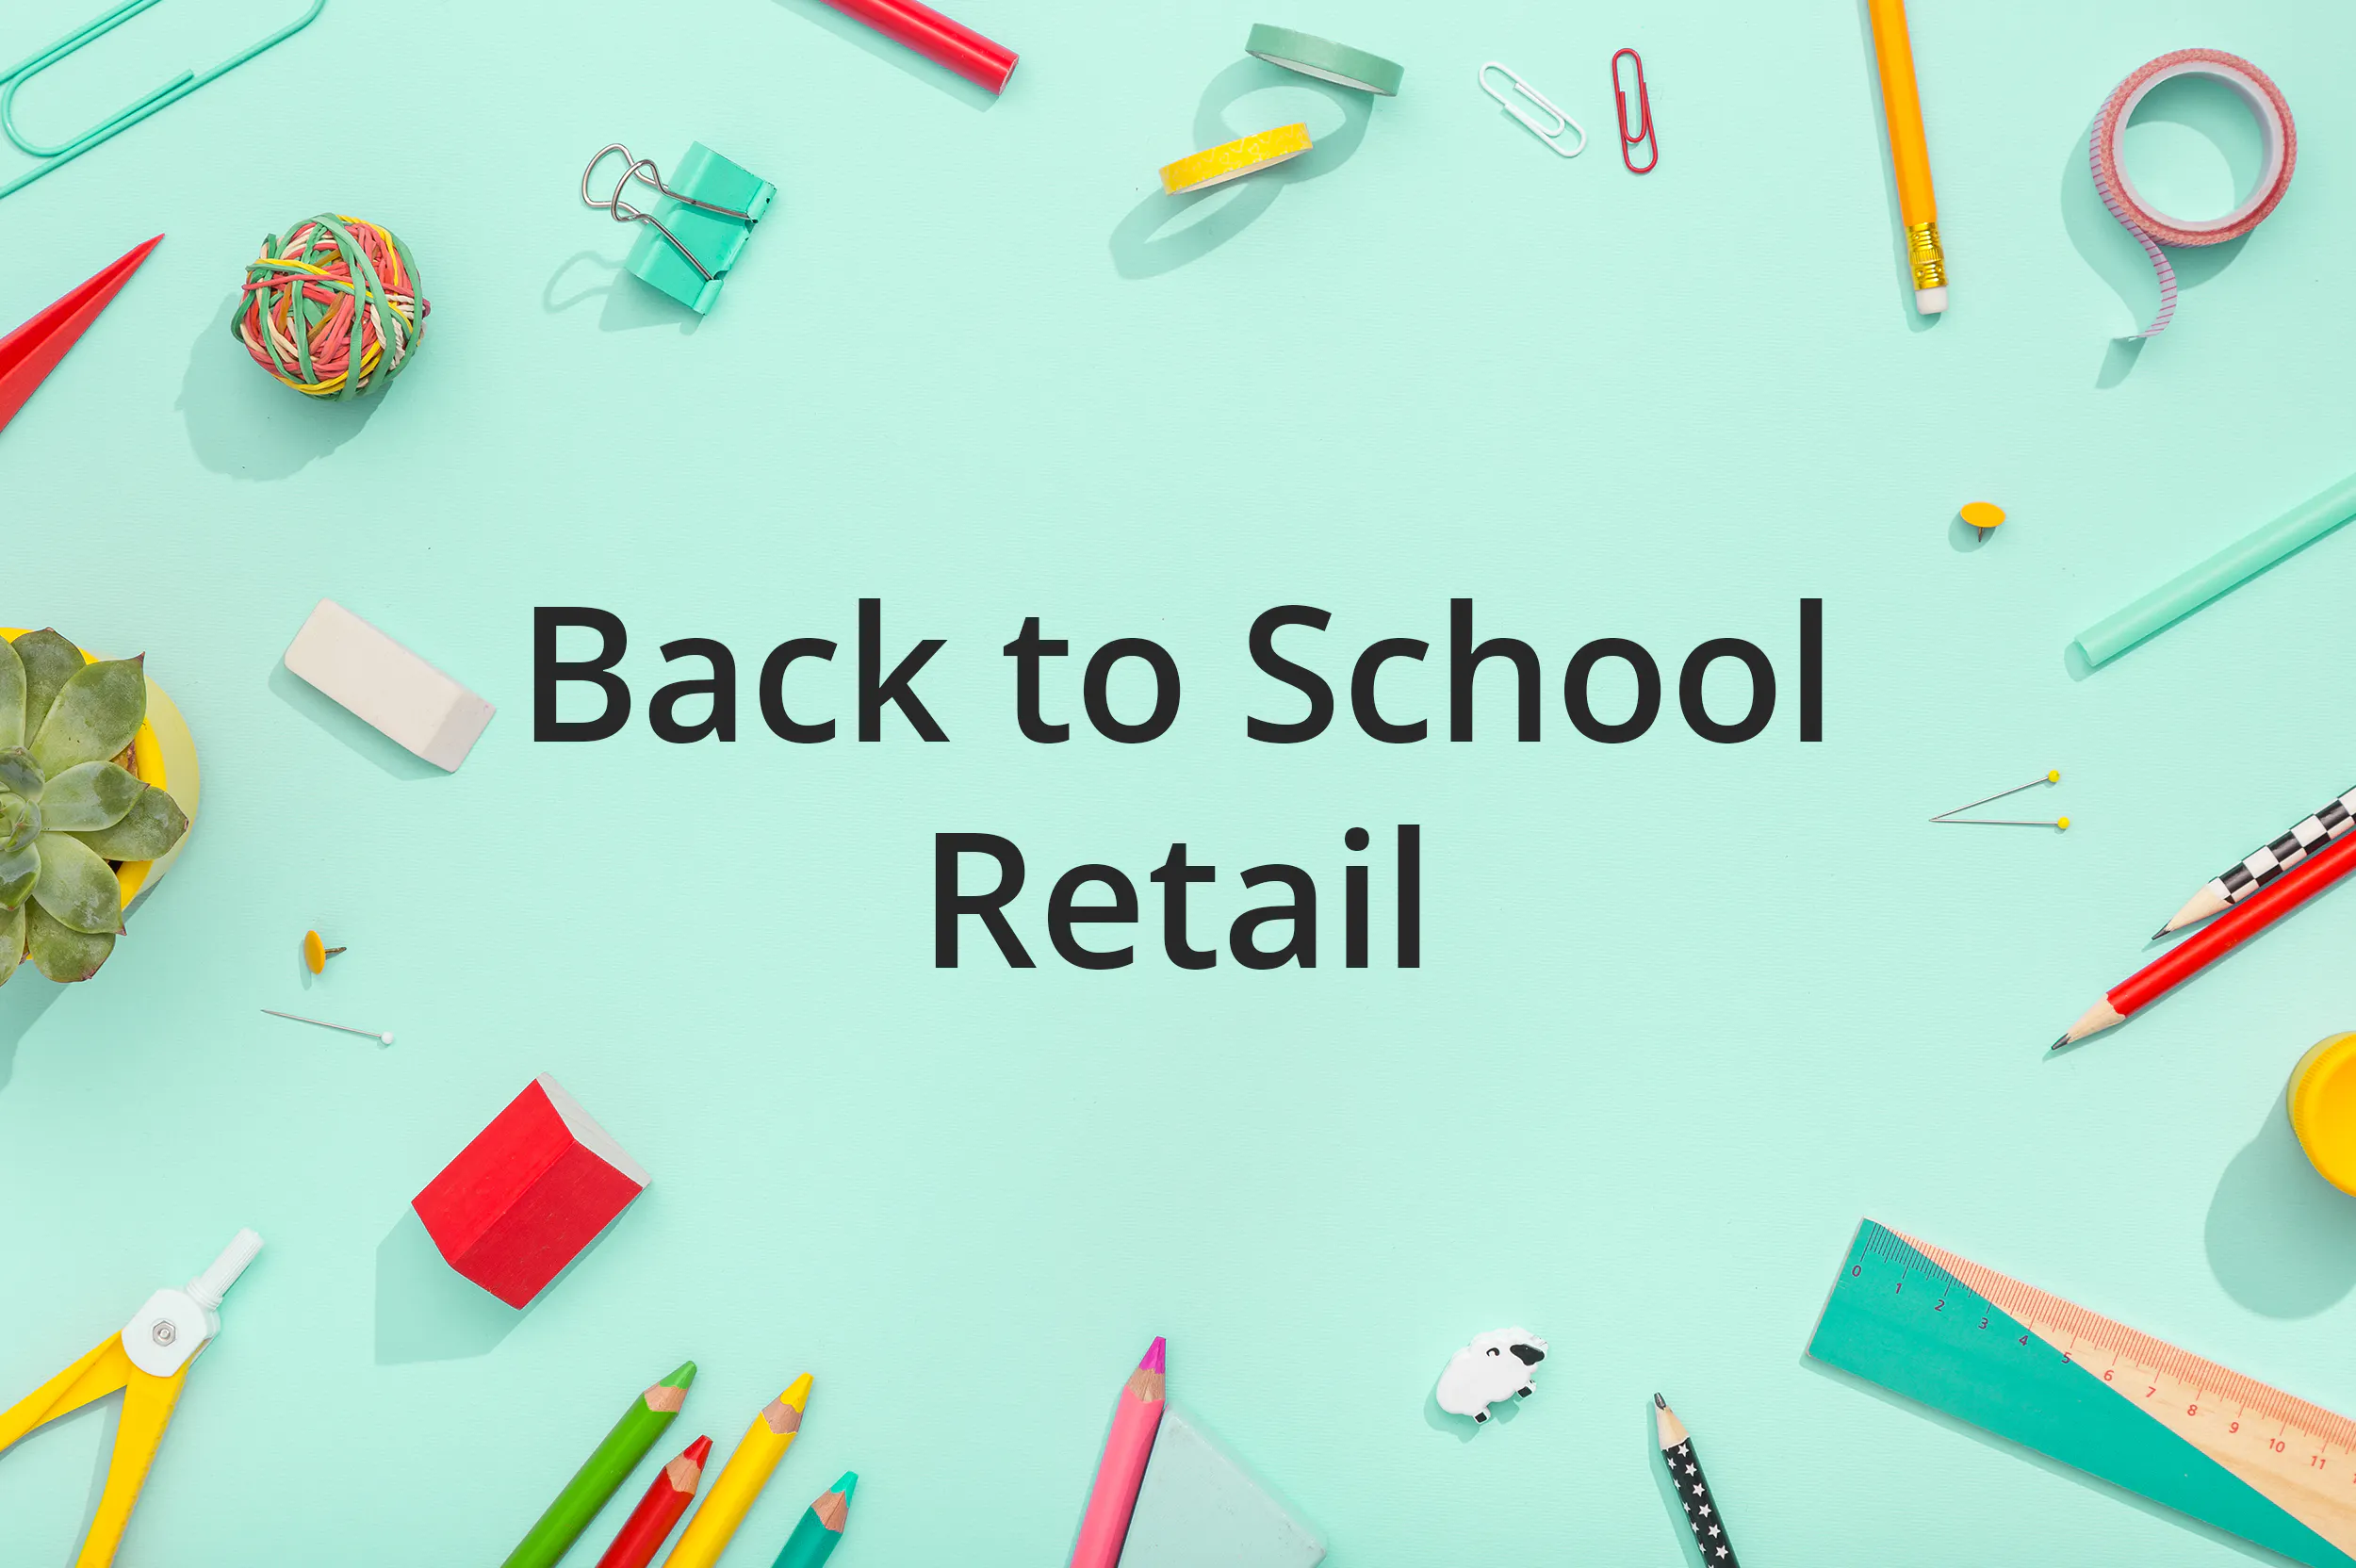 Consumers are trending between affordable and trendy for Back to School retail.